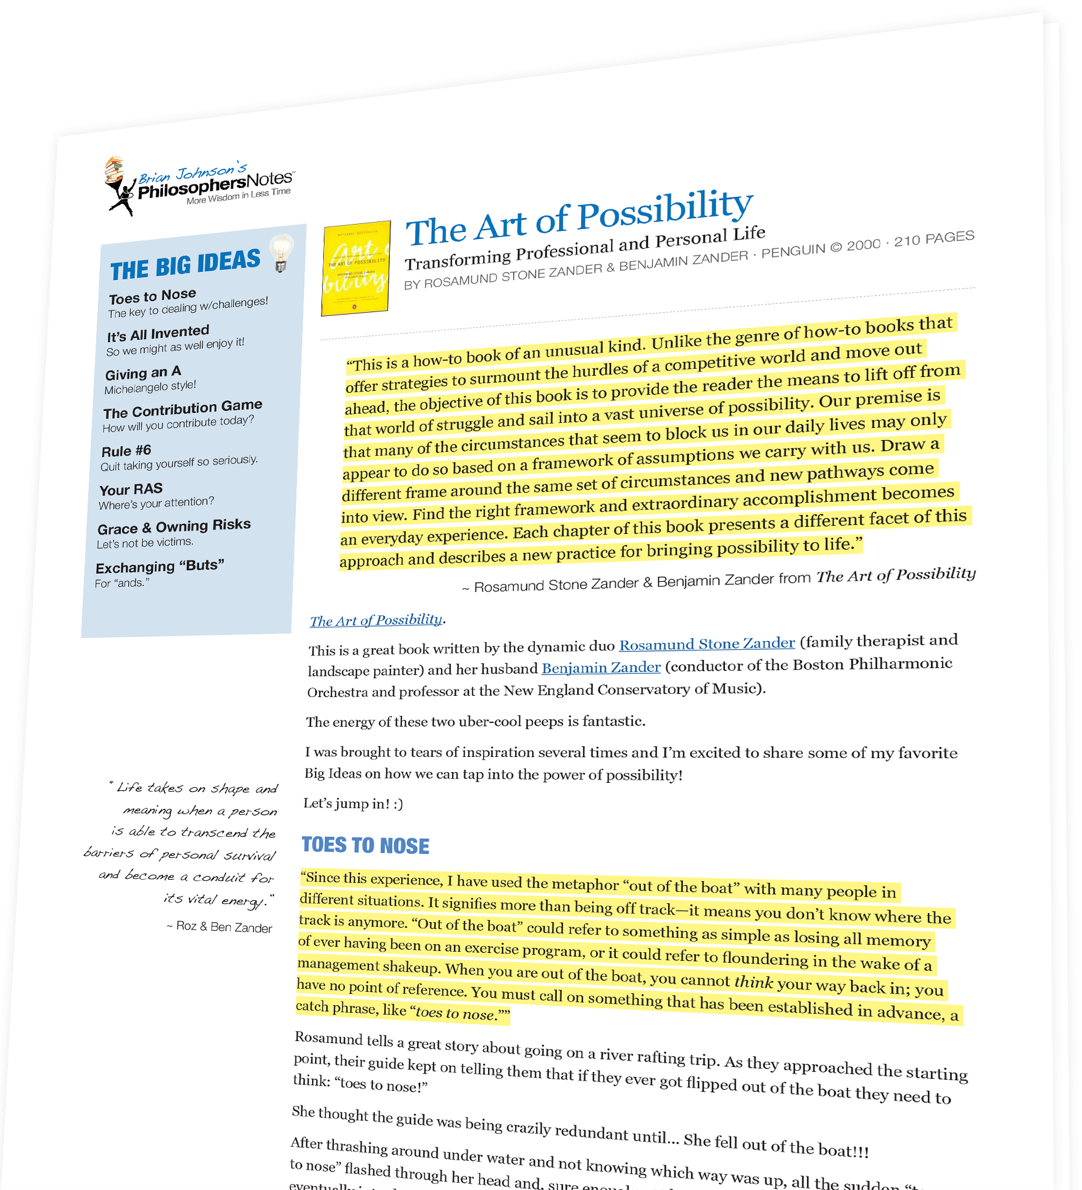 The art of possibility pdf free. download full